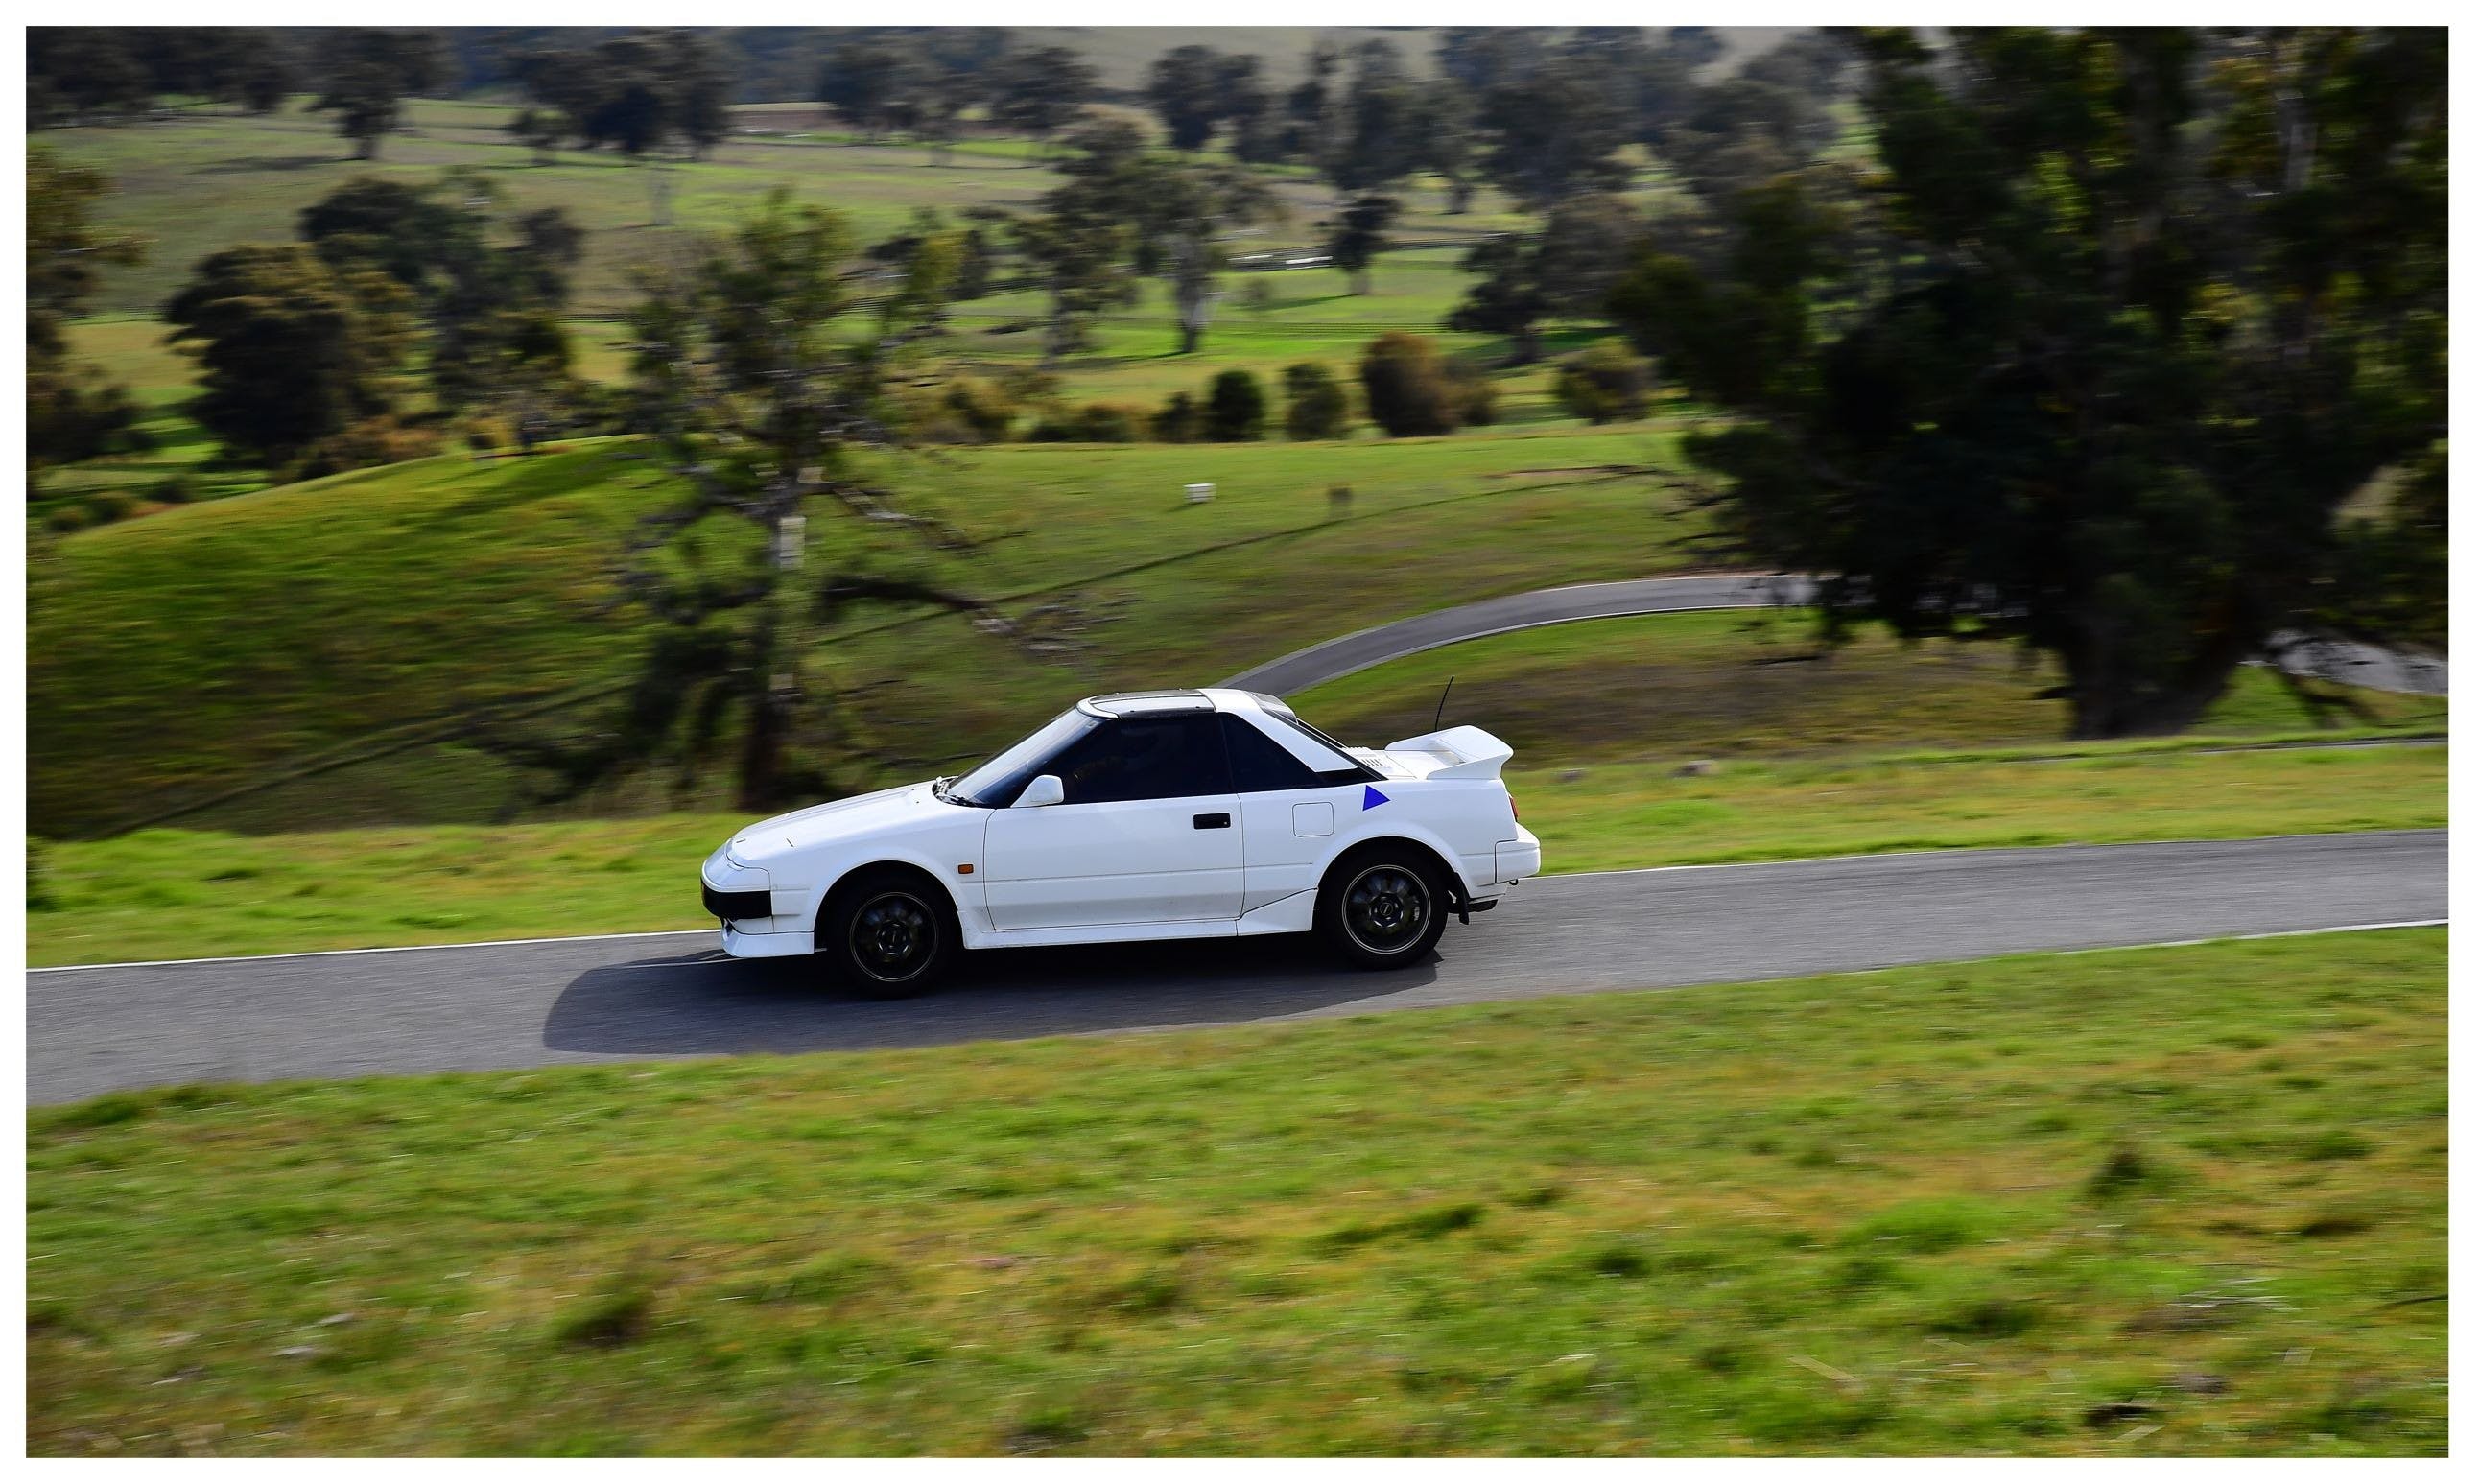 Winter Cup 4 - Hillclimb - Accommodation Adelaide